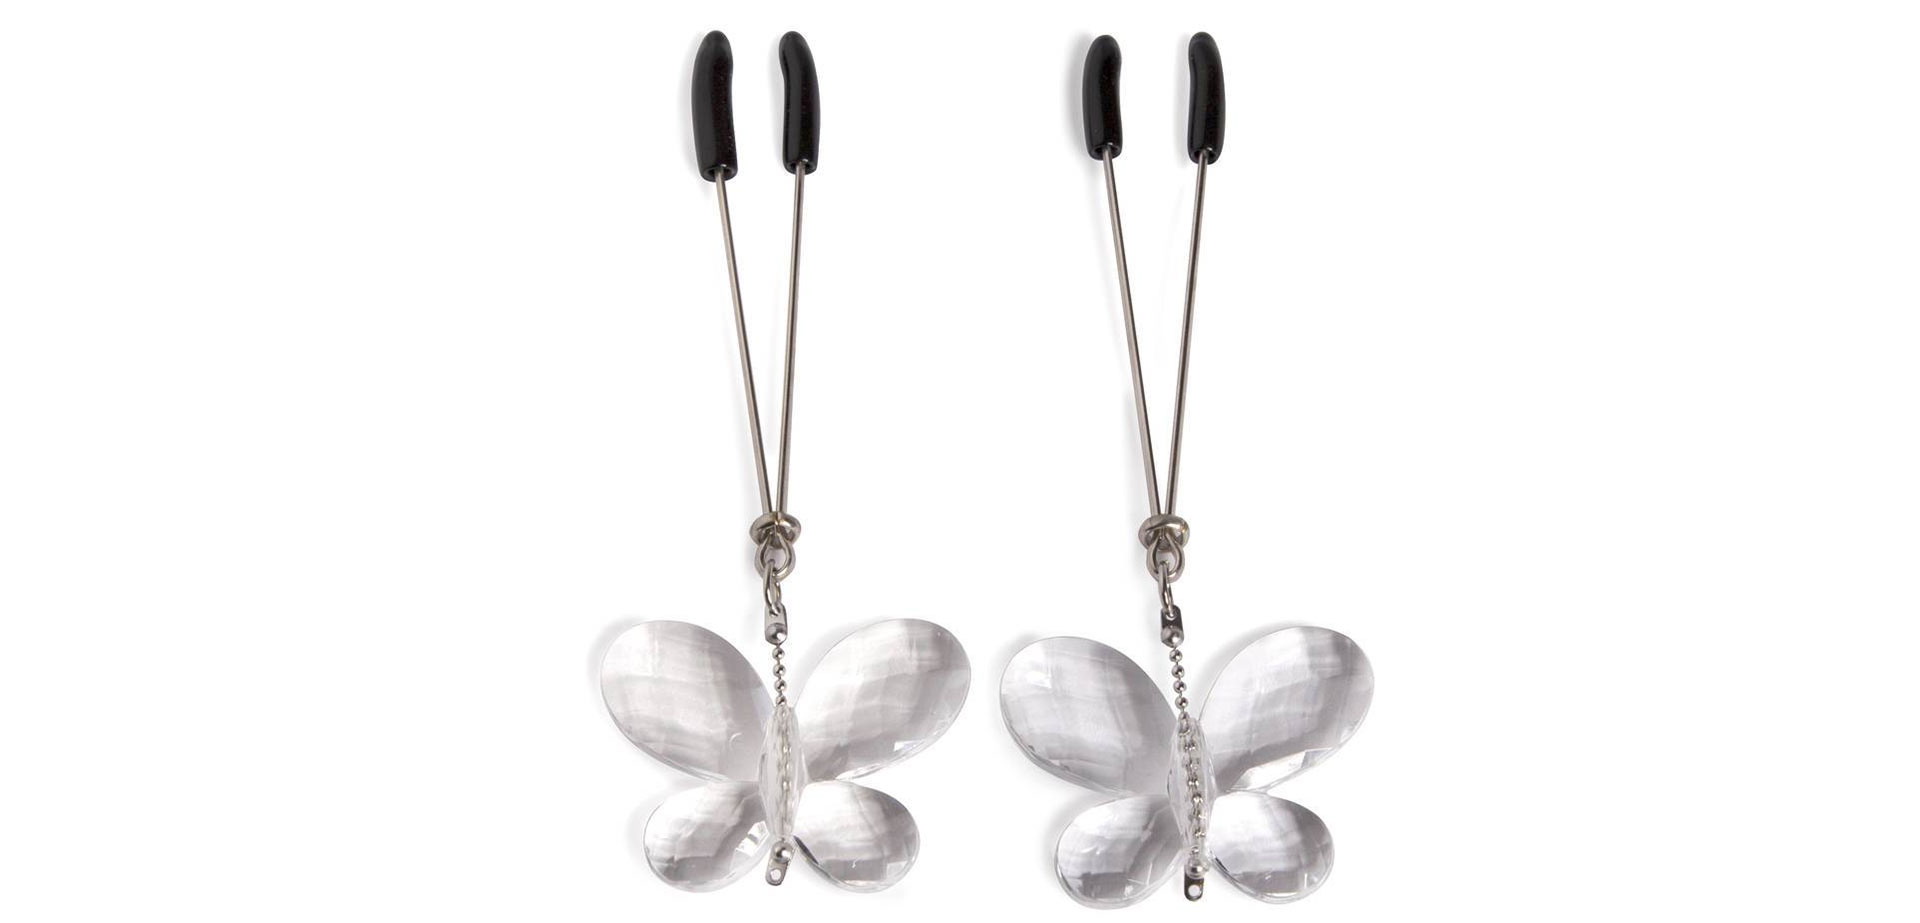 Bad Kitty Butterfly nipple clamps.